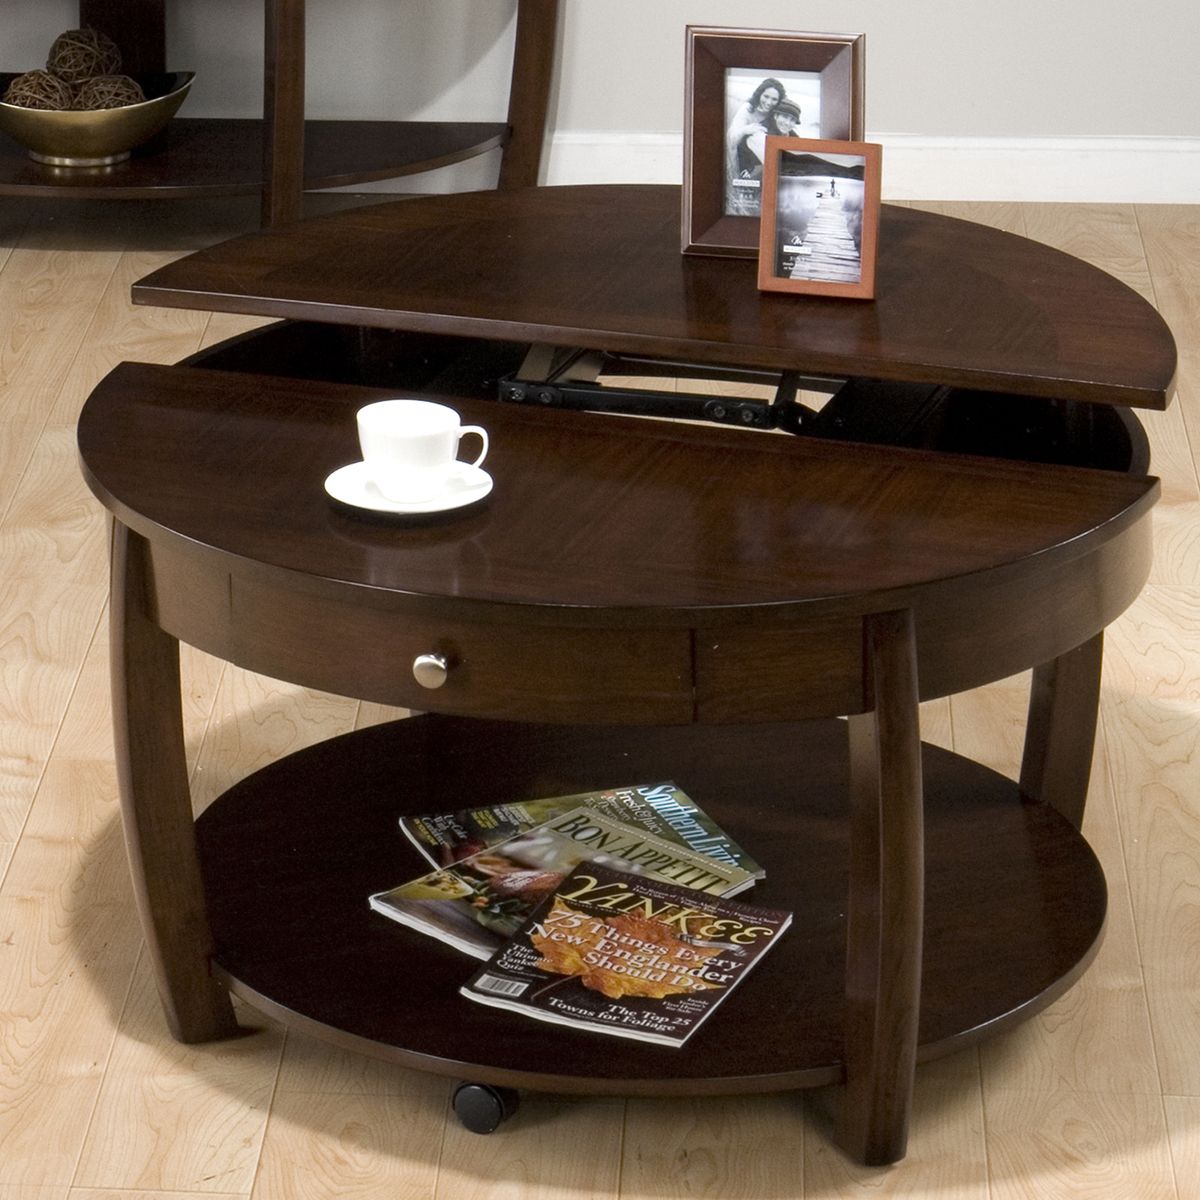 The Round Coffee Tables With Storage – The Simple And Compact Furniture For Round Coffee Tables (View 5 of 15)